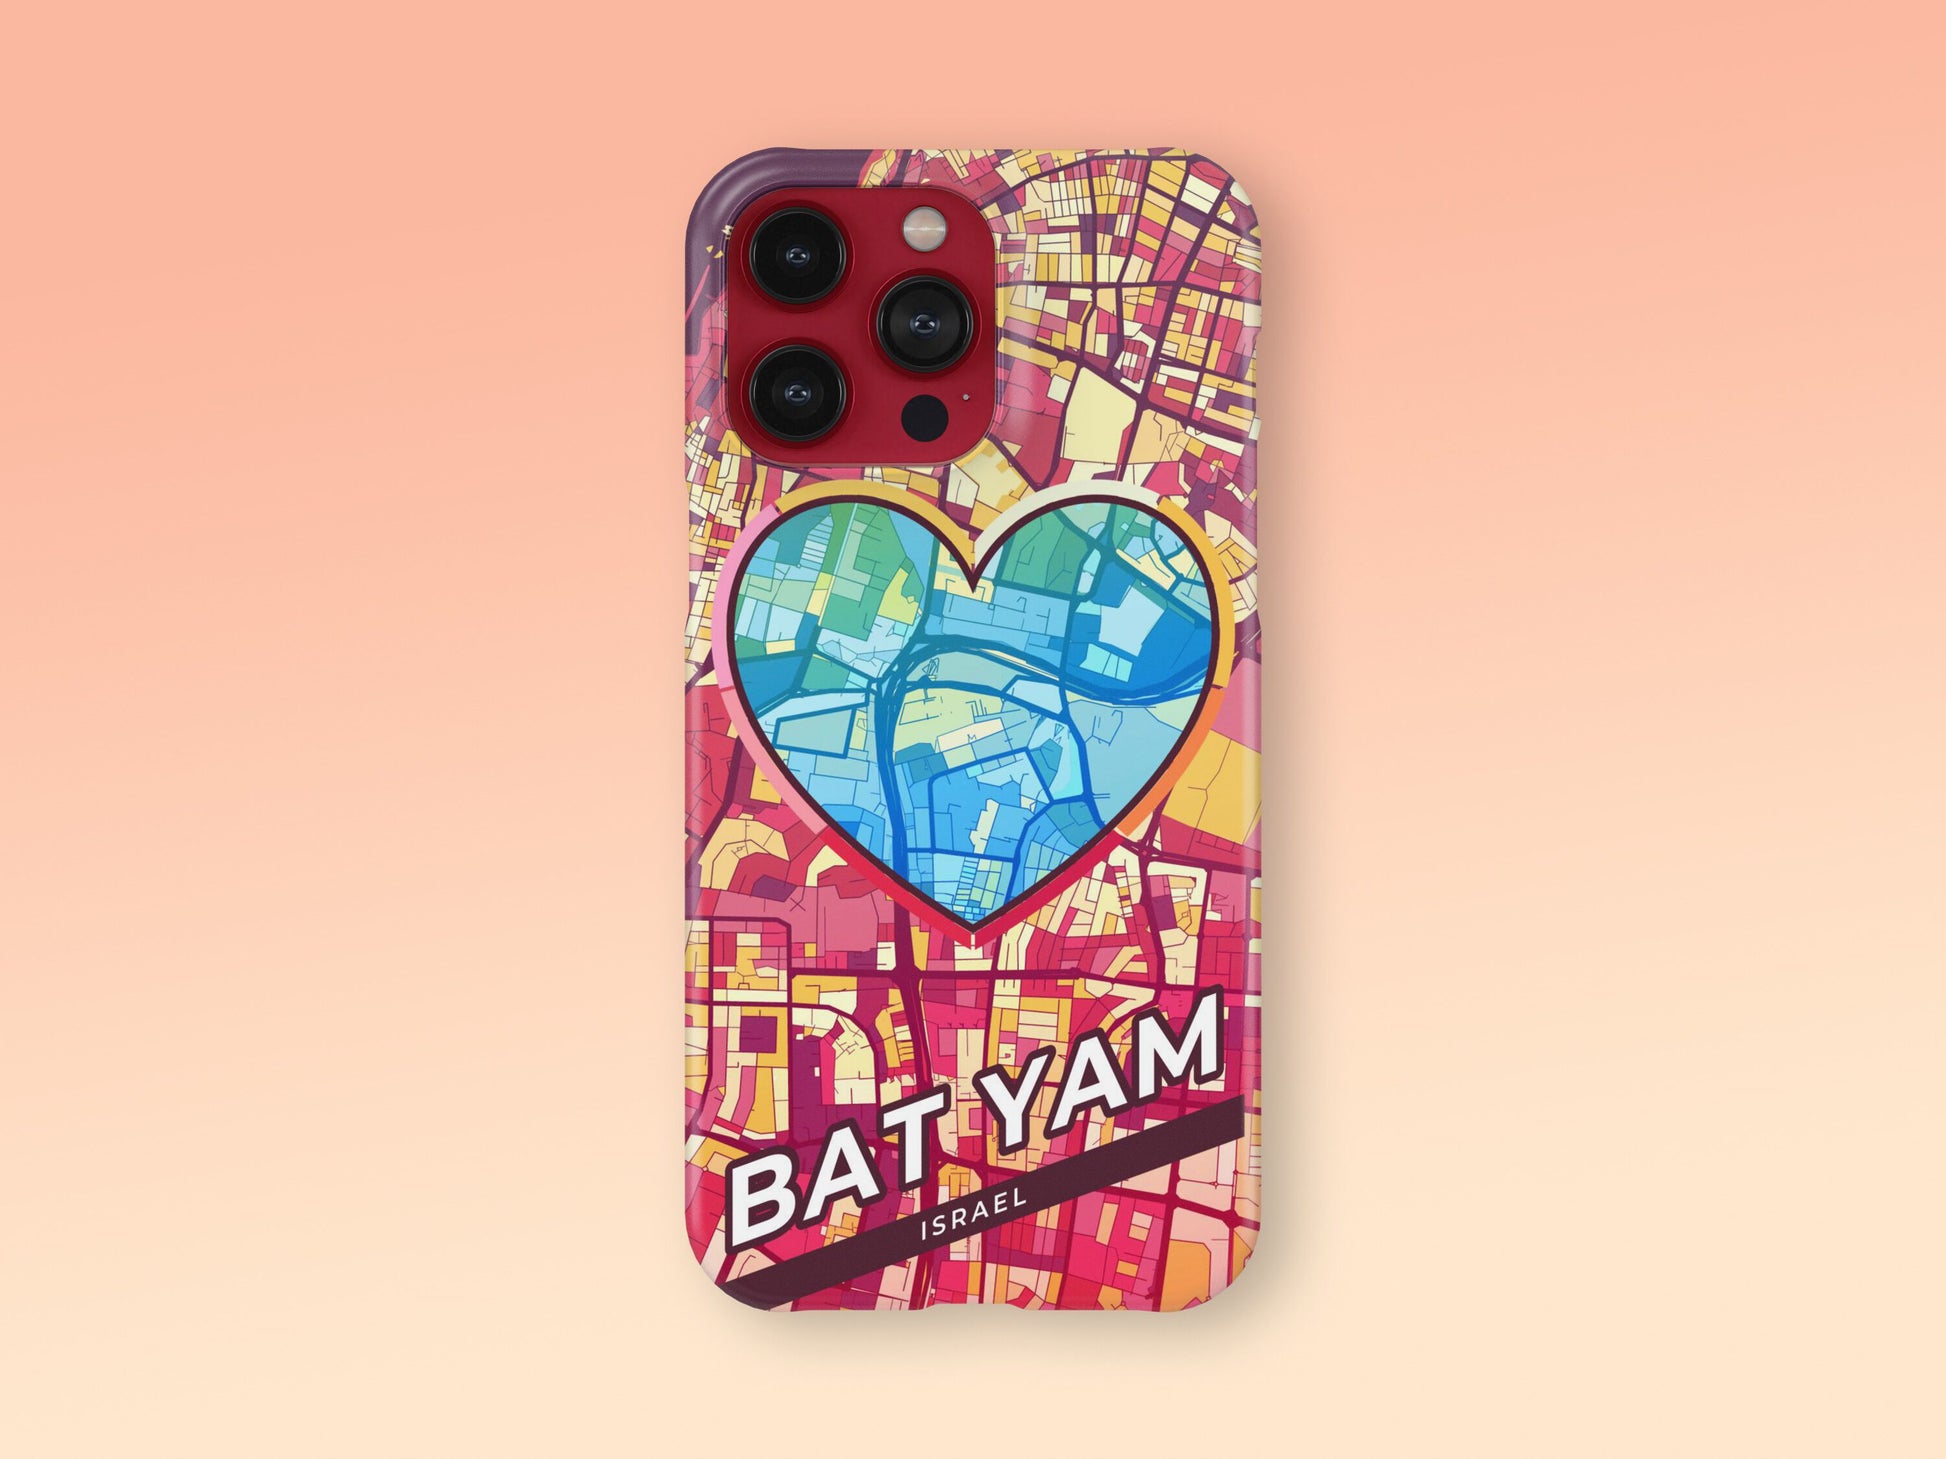 Bat Yam Israel slim phone case with colorful icon. Birthday, wedding or housewarming gift. Couple match cases. 2